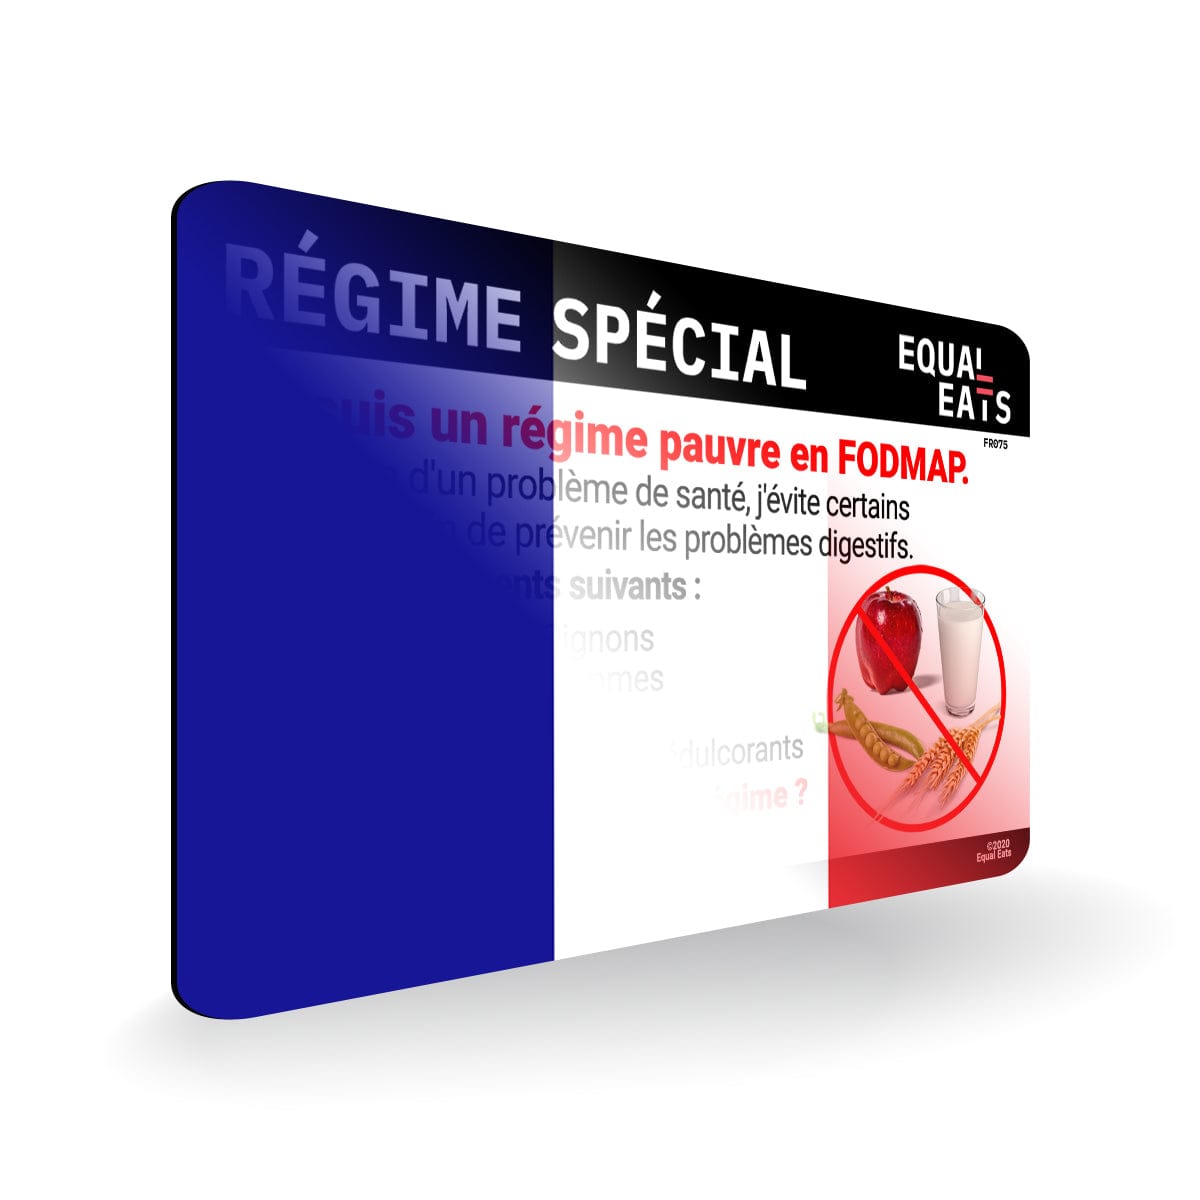 Low FODMAP Diet in French. Low FODMAP Diet Card for France